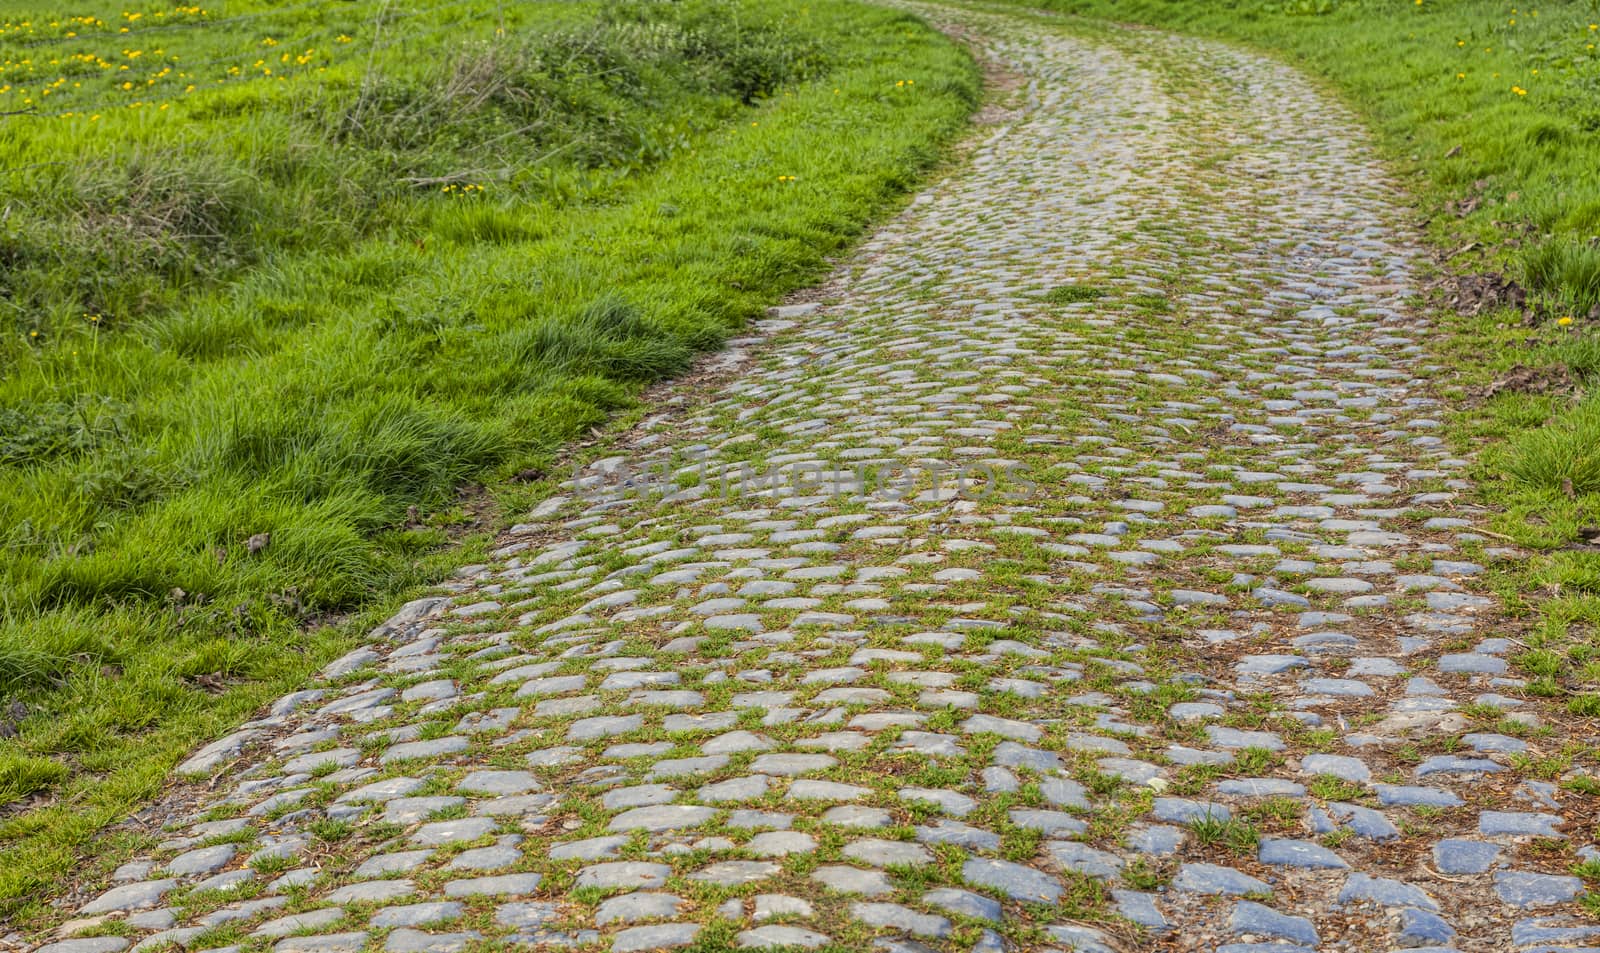 Cobbelstone road located in the North of France near Lille. On such roads every year is organized one of the most famous one day cycling race Paris-Roubaix.